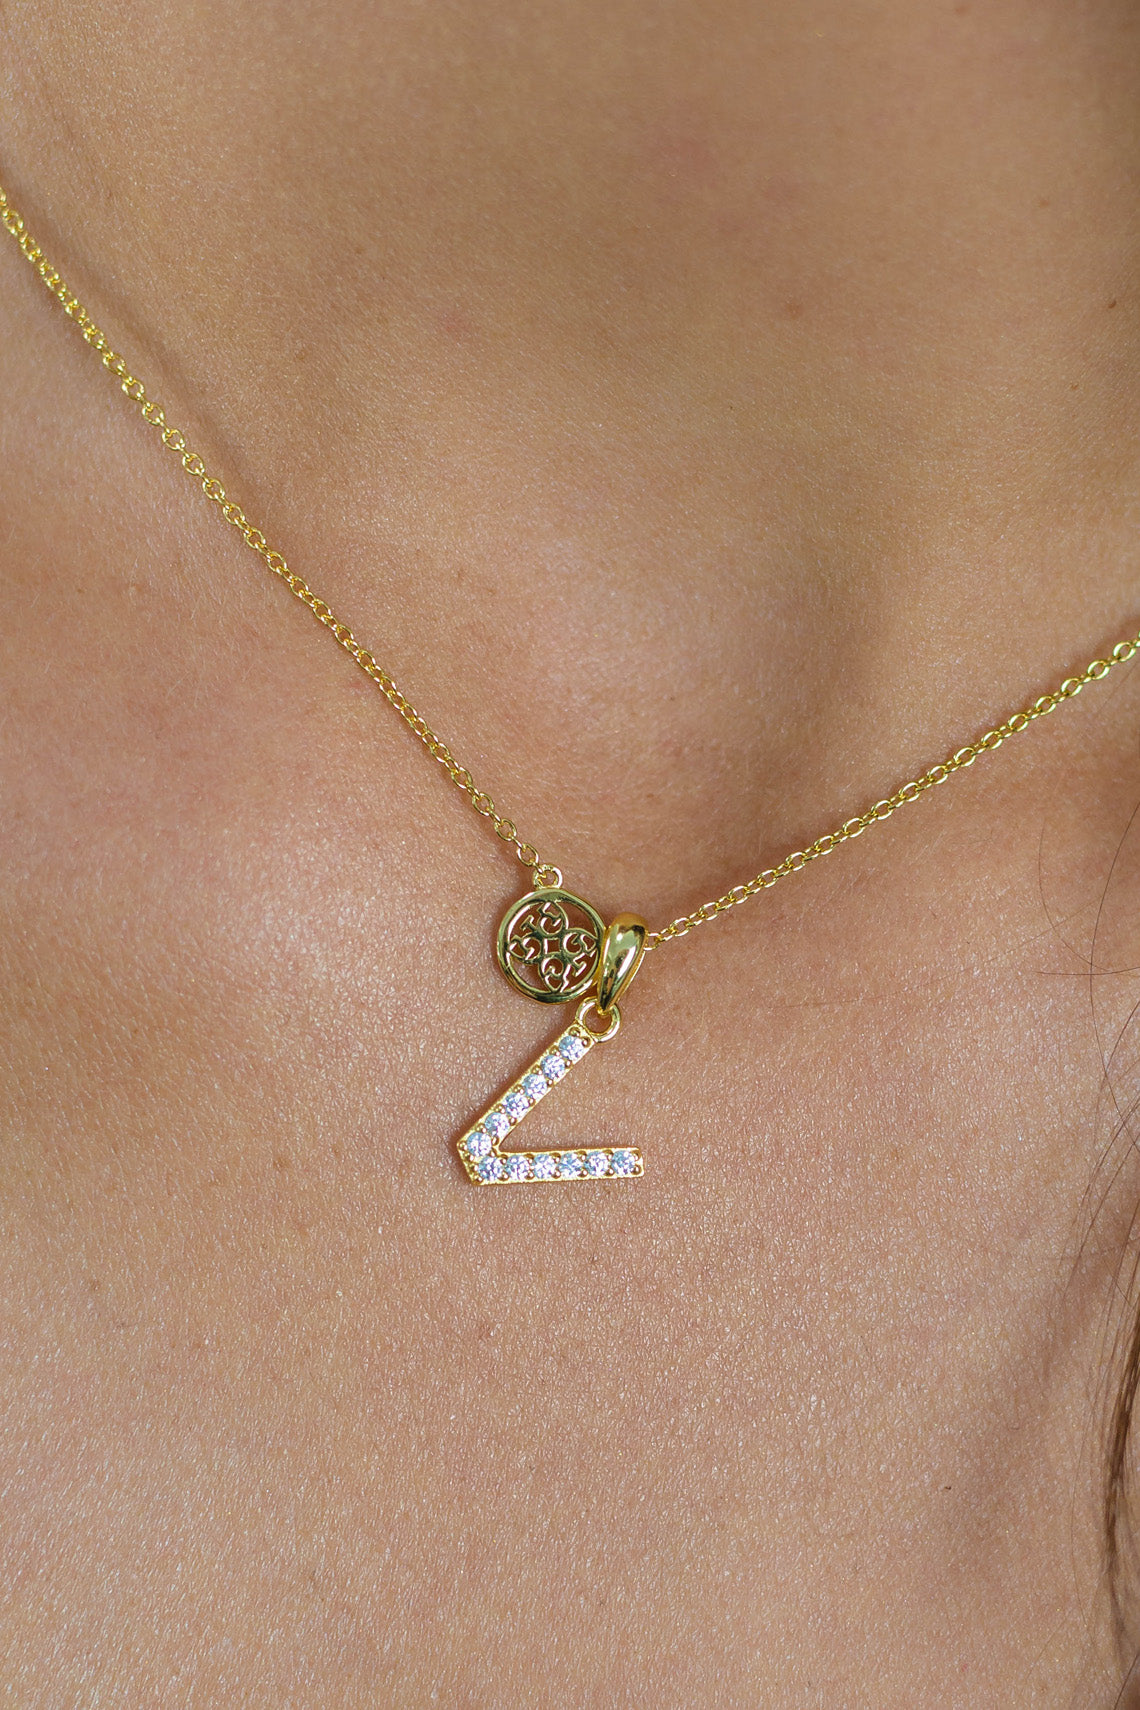 LUXURY LETTERS V INITIAL PENDANT GOLD